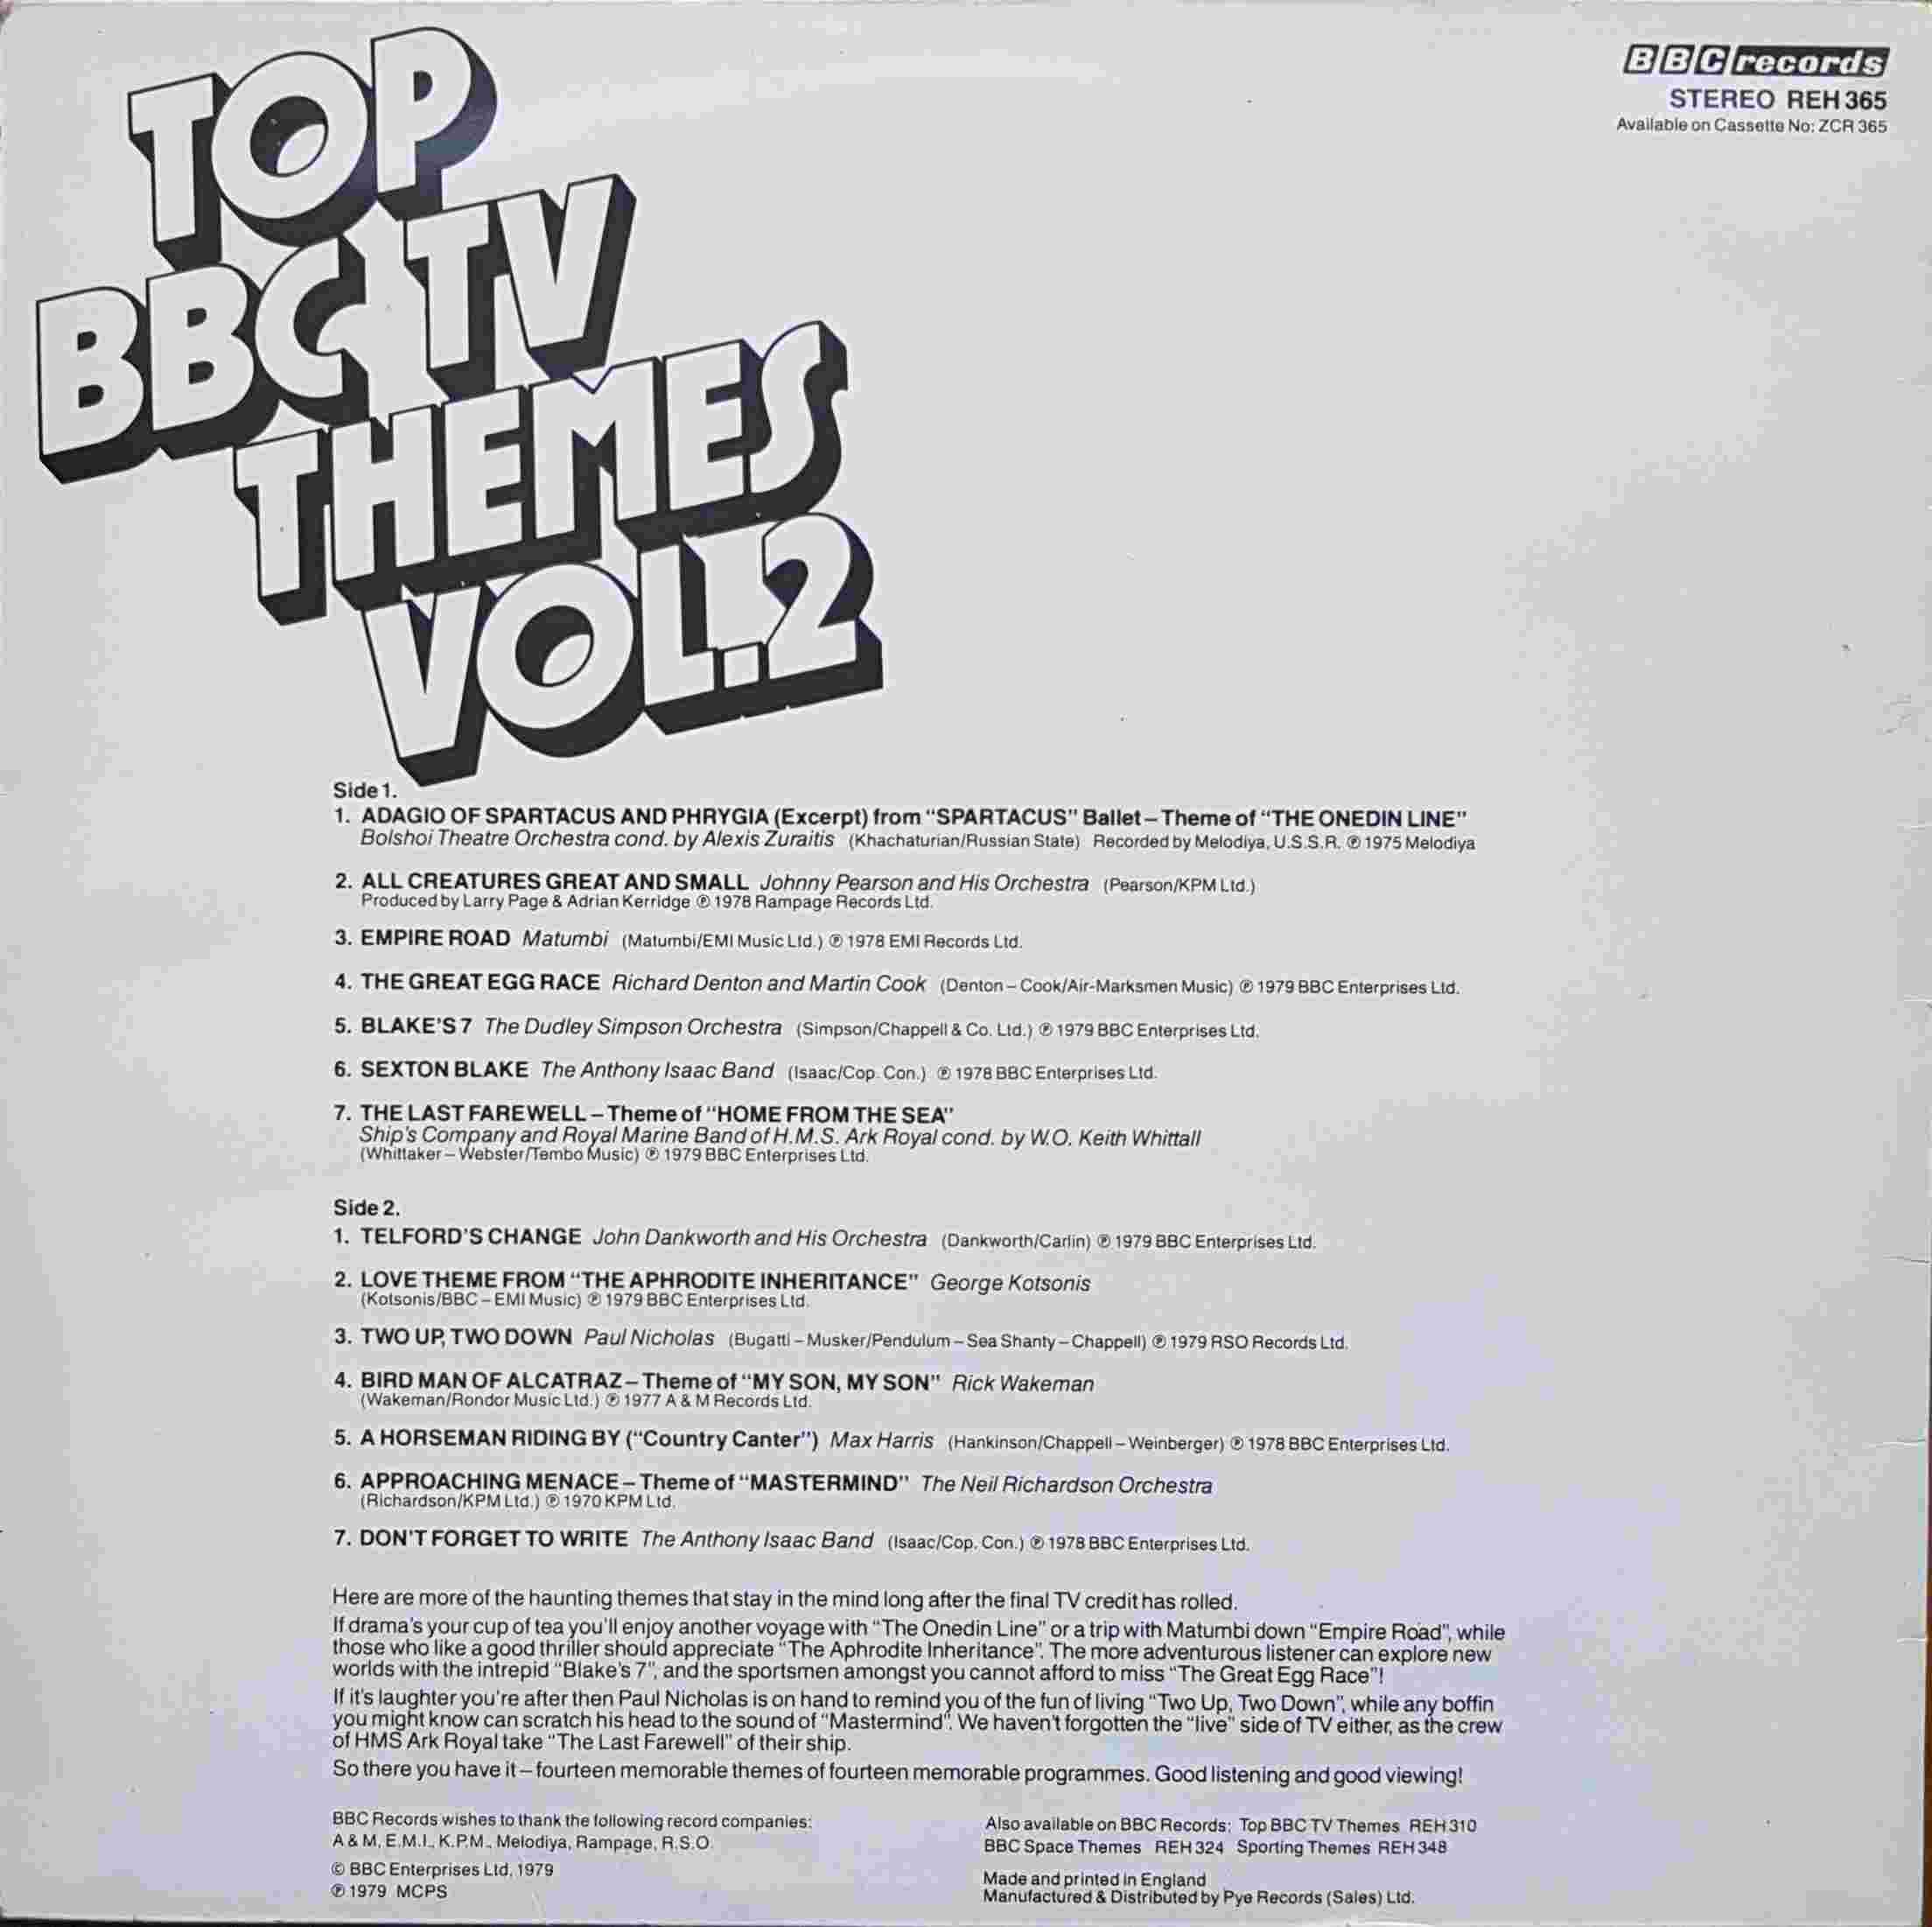 Picture of REH 365 Top BBC TV themes - Volume 2 by artist Various from the BBC records and Tapes library